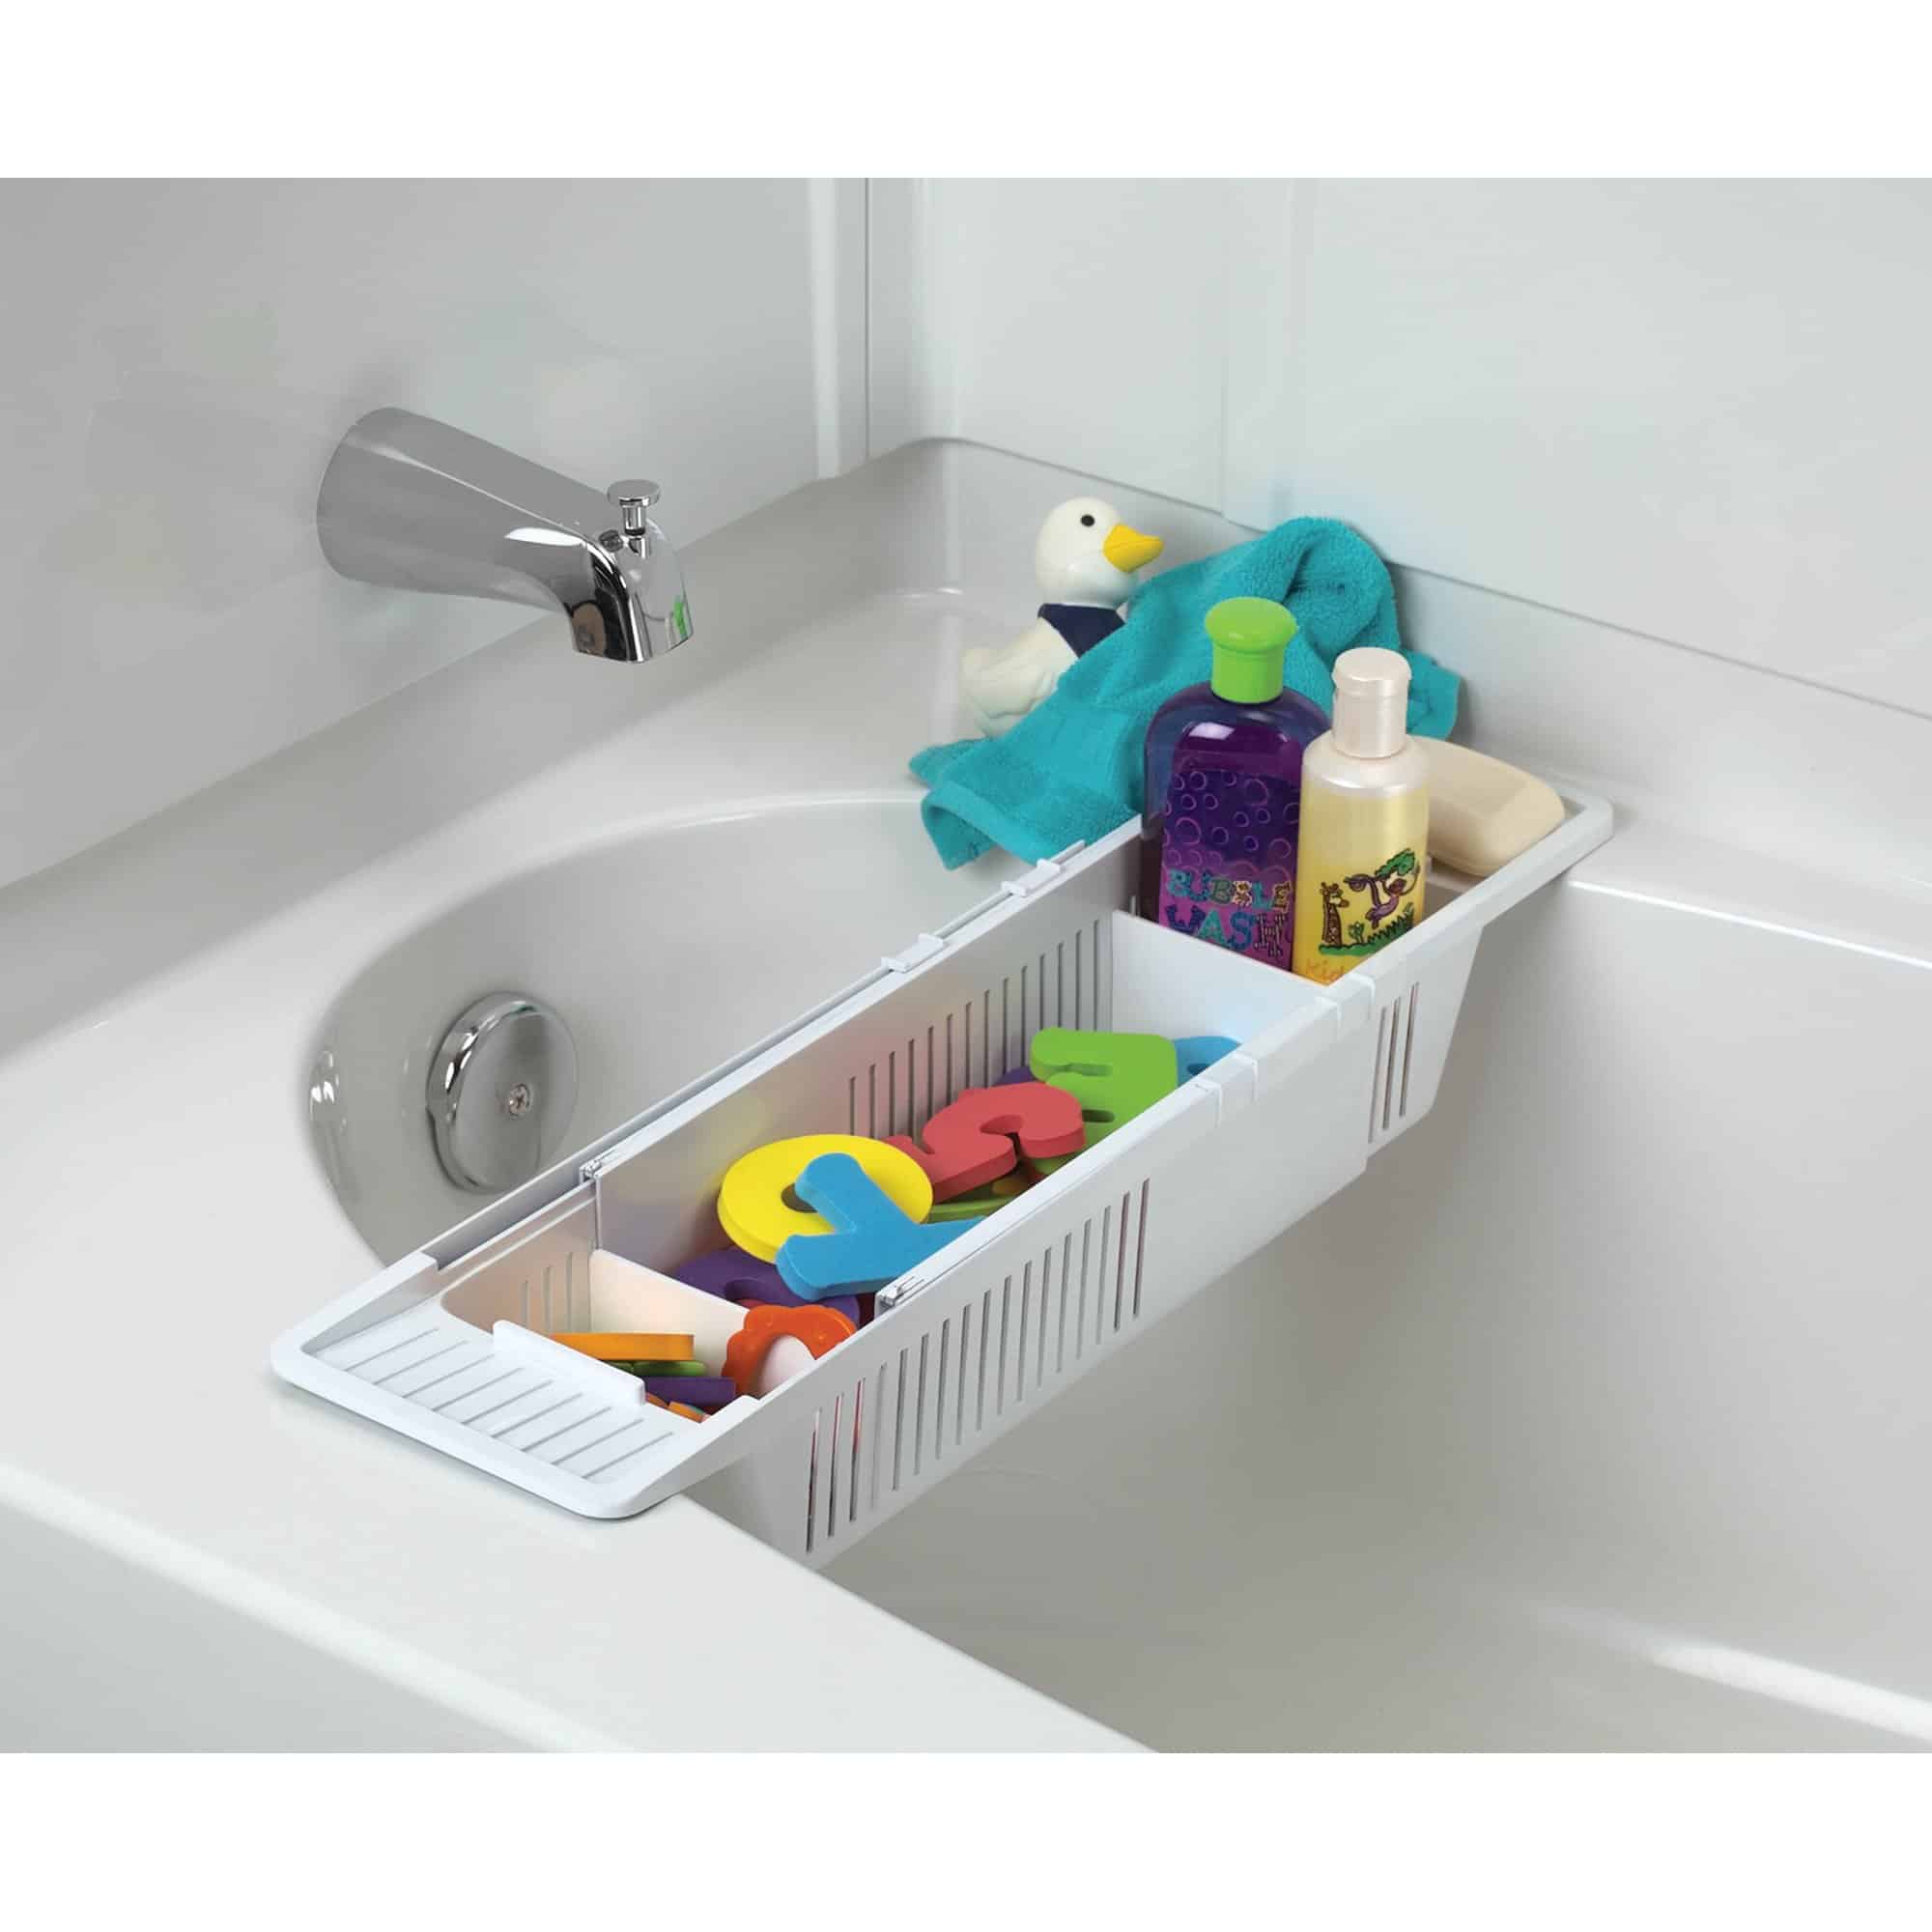 15 Ways to Store Bath Toys and Magically Declutter your Bathroom